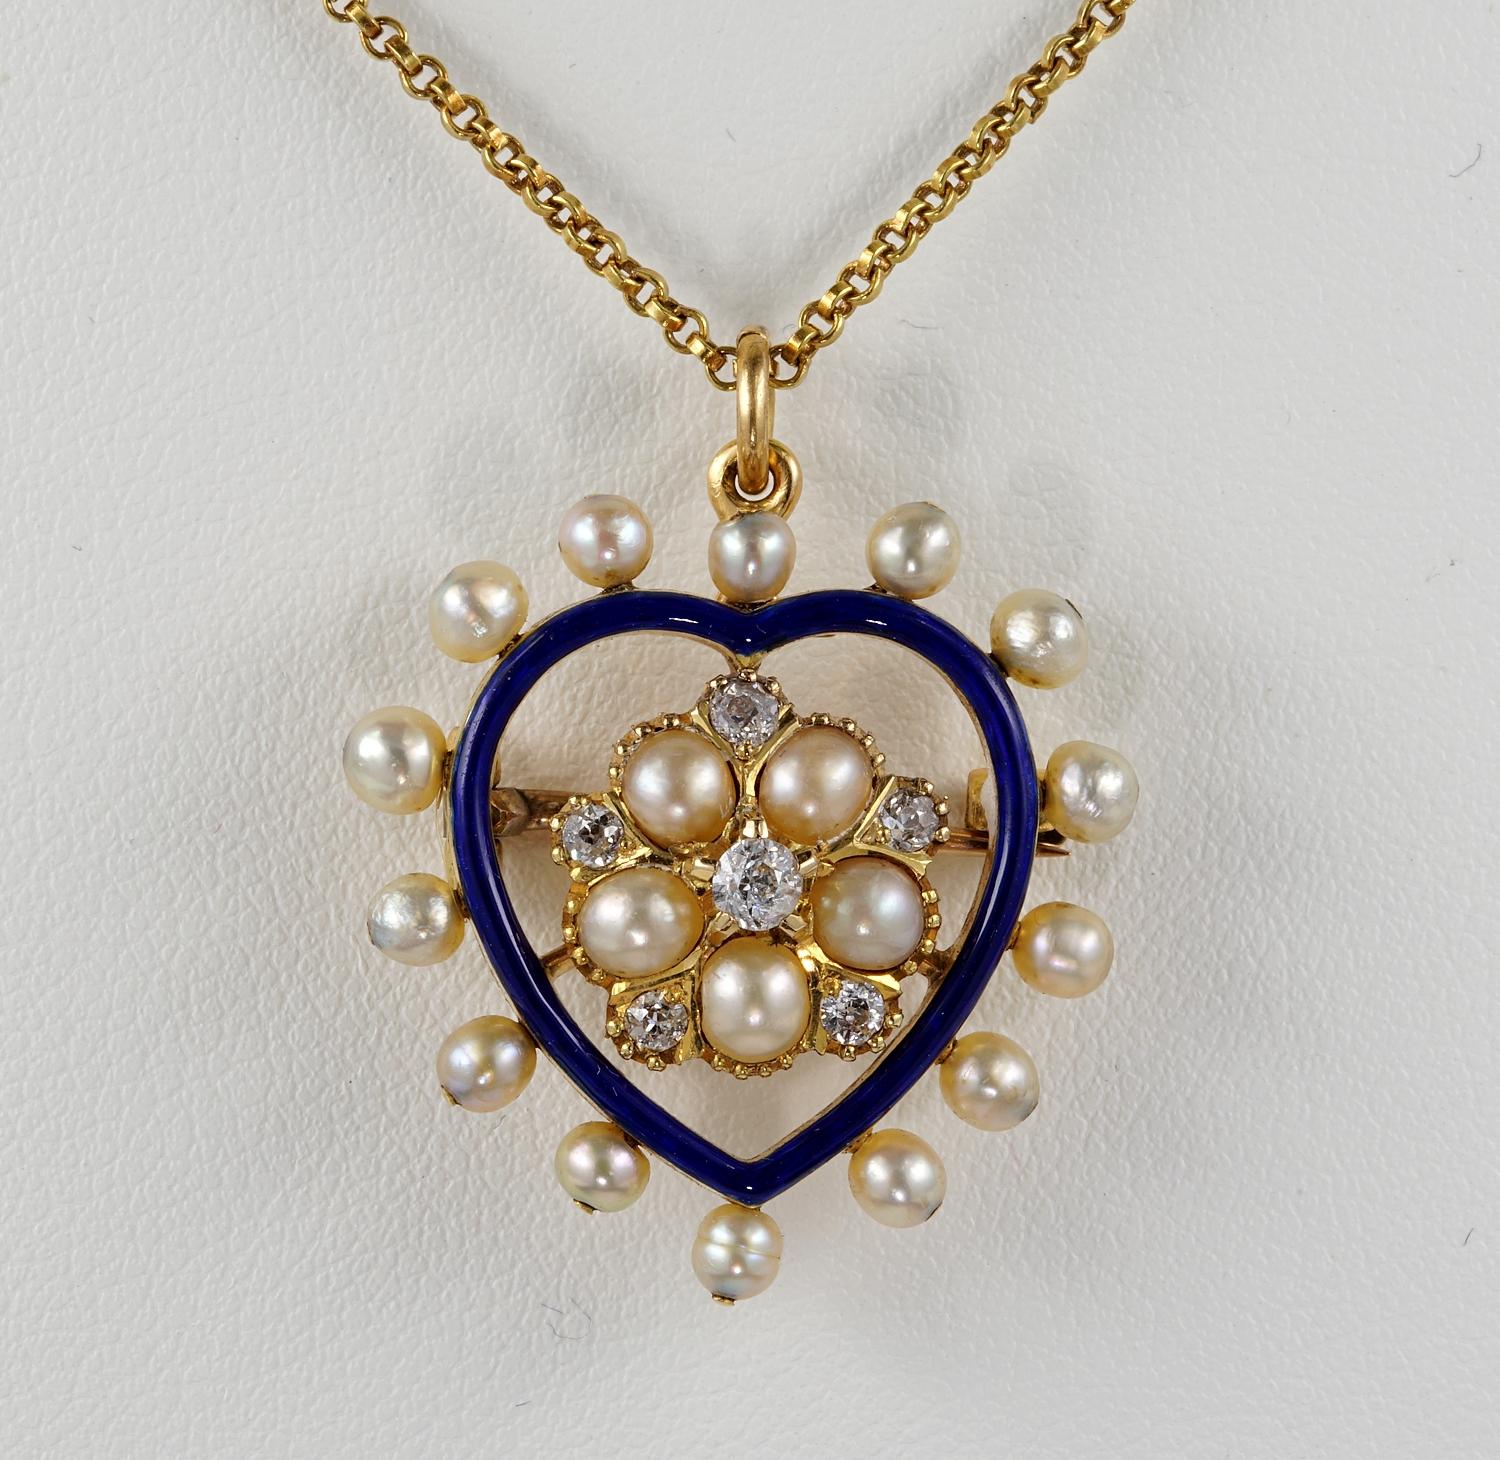 Old Mine Cut Victorian Diamond Natural Pearl Royal Blue 18 KT Heart Brooch/Pendant For Sale